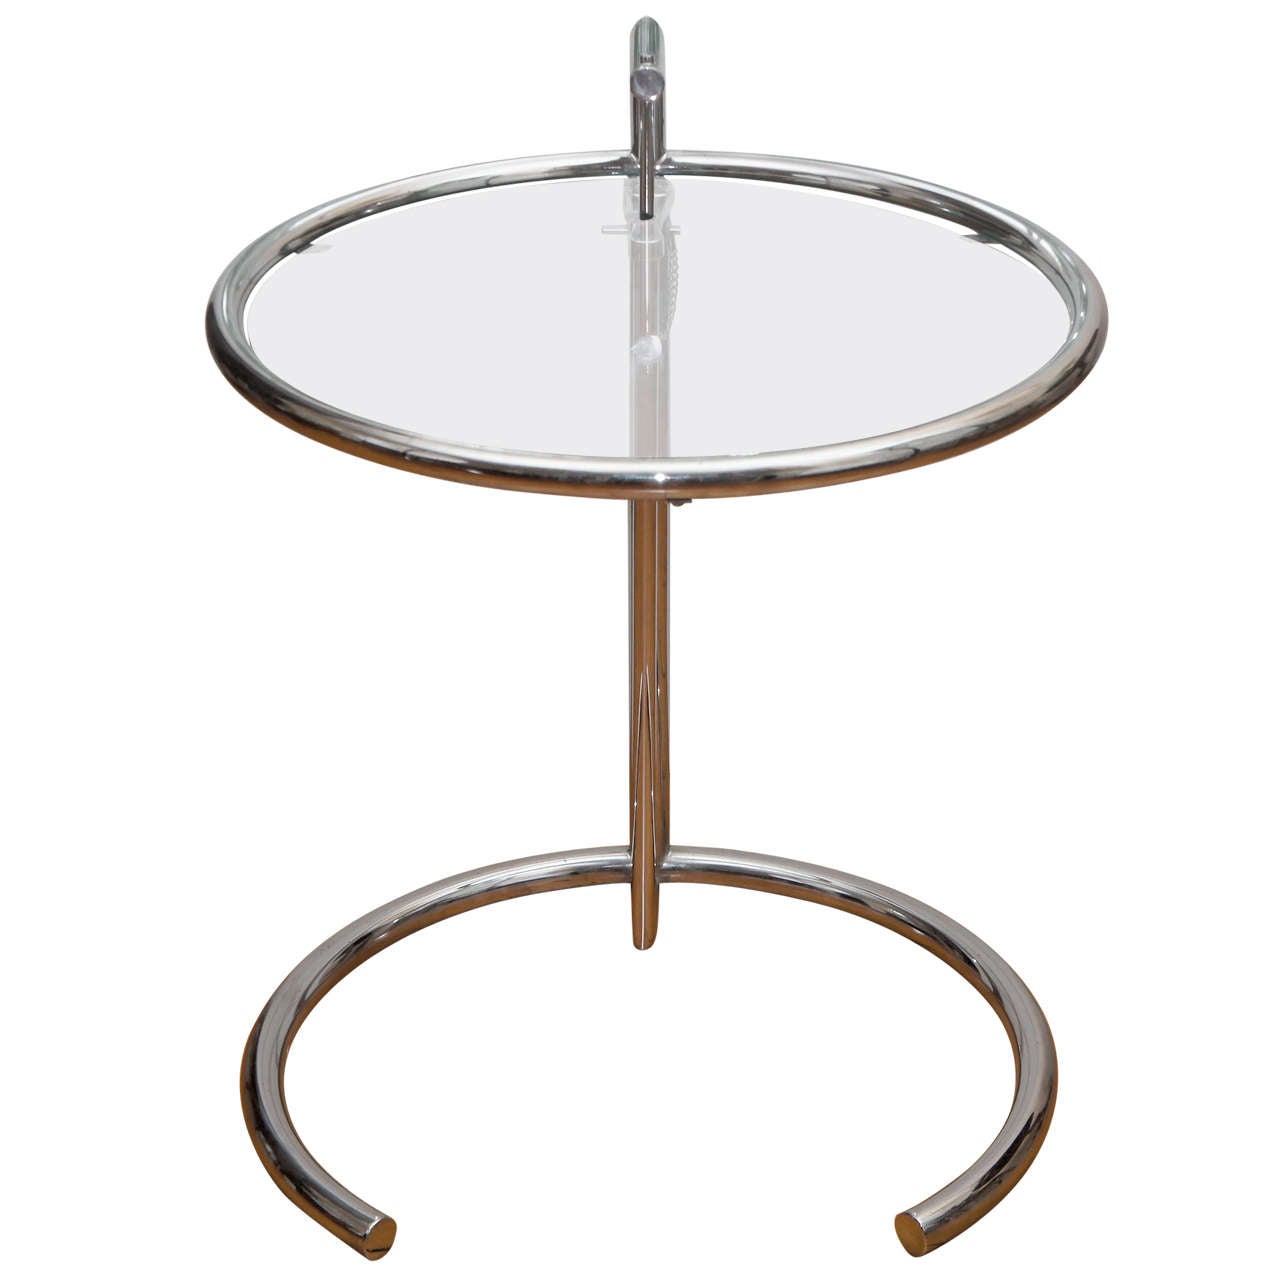 Eileen Gray chrome and glass round table, 1960